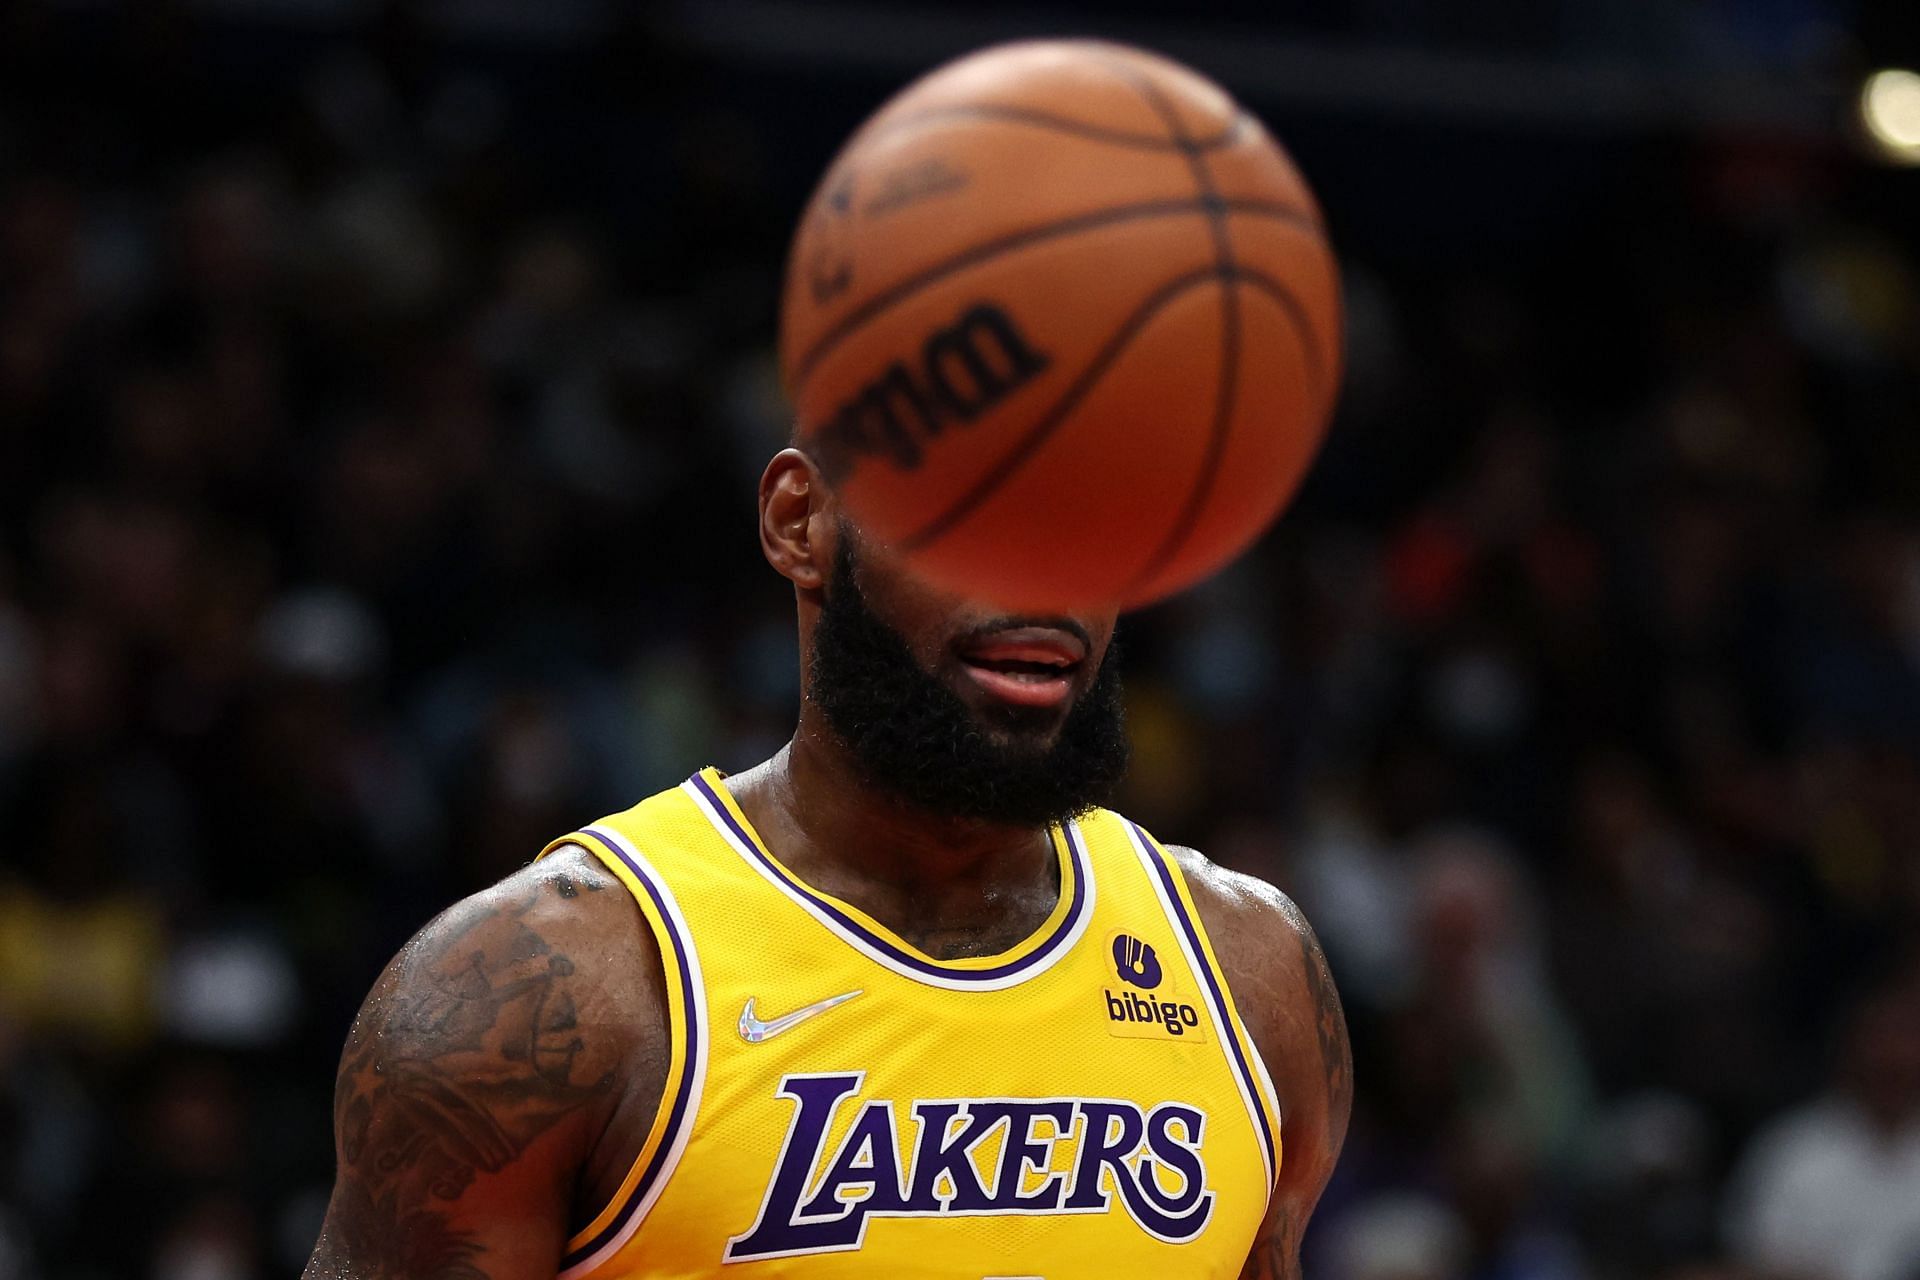 LeBron James&#039; 19th season could end early if the Lakers are unable to find wins in their final stretch.